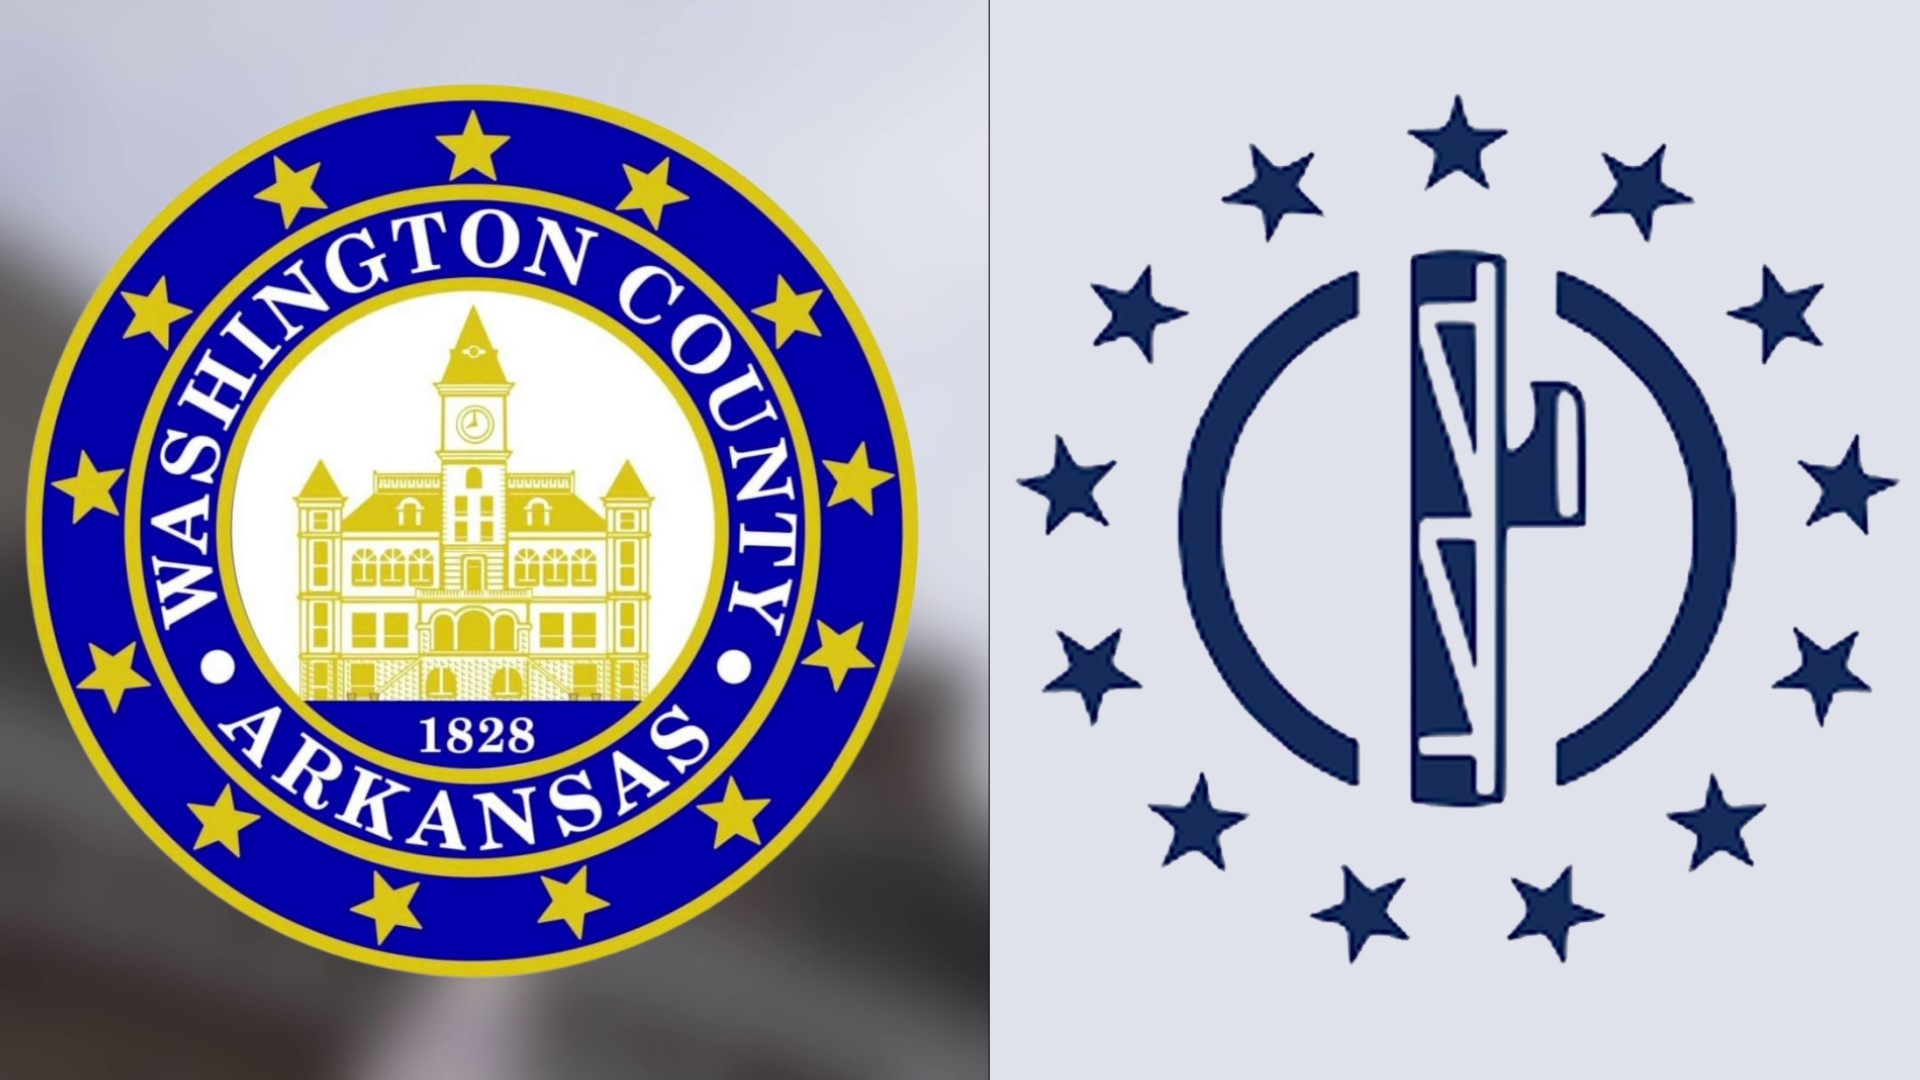 Washington County's new seal would include 13 stars around the original, but similarities to far-right symbols are causing concern.